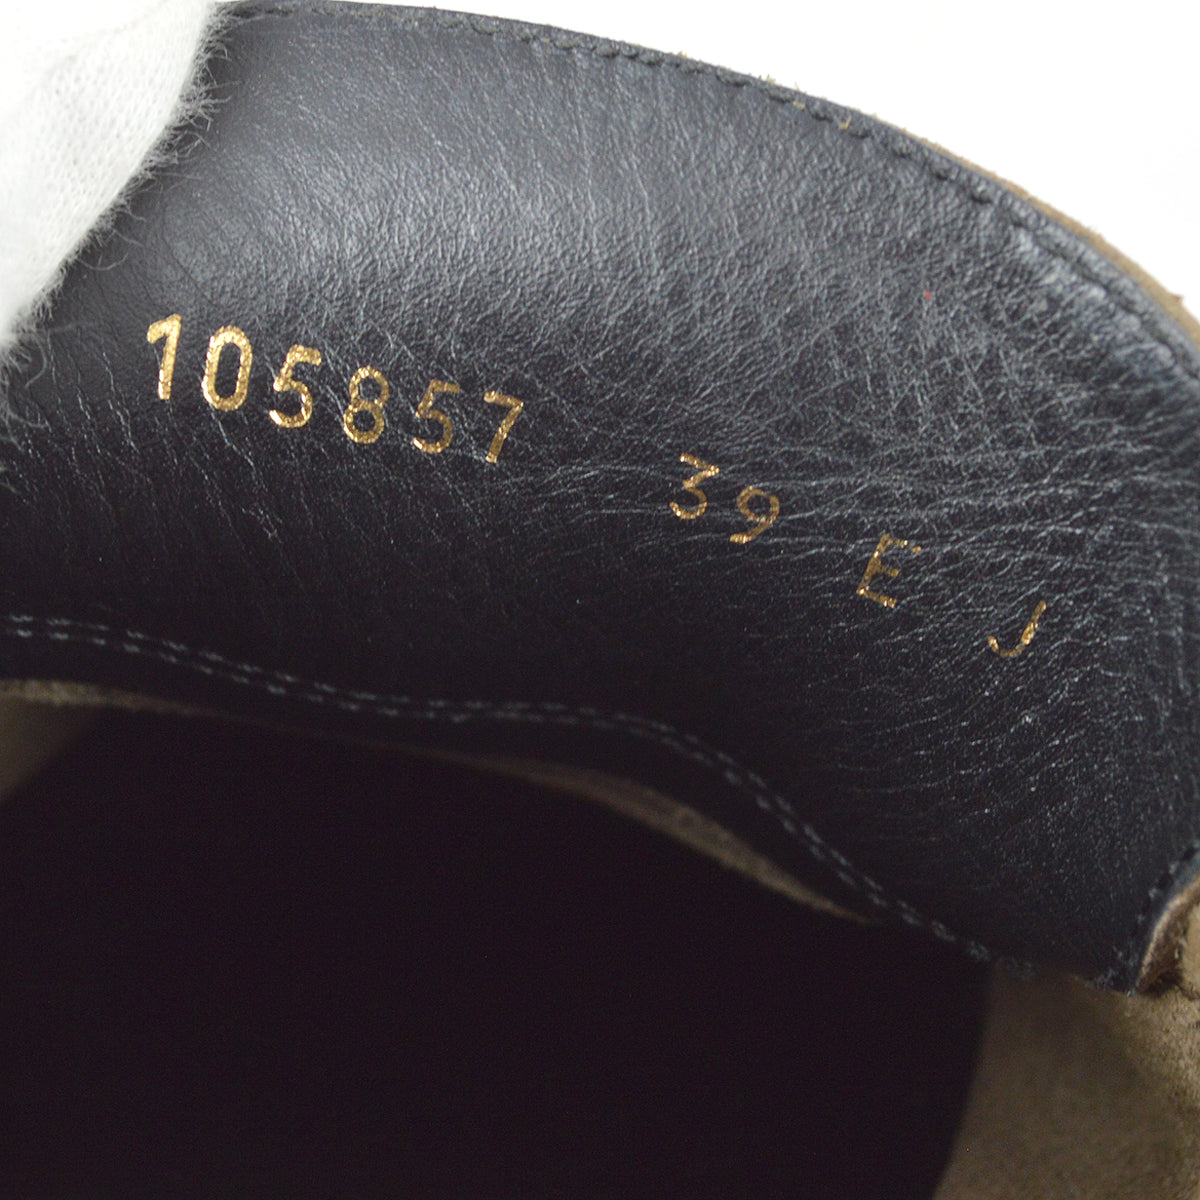 Gucci Suede Horsebit Loafers Shoes 